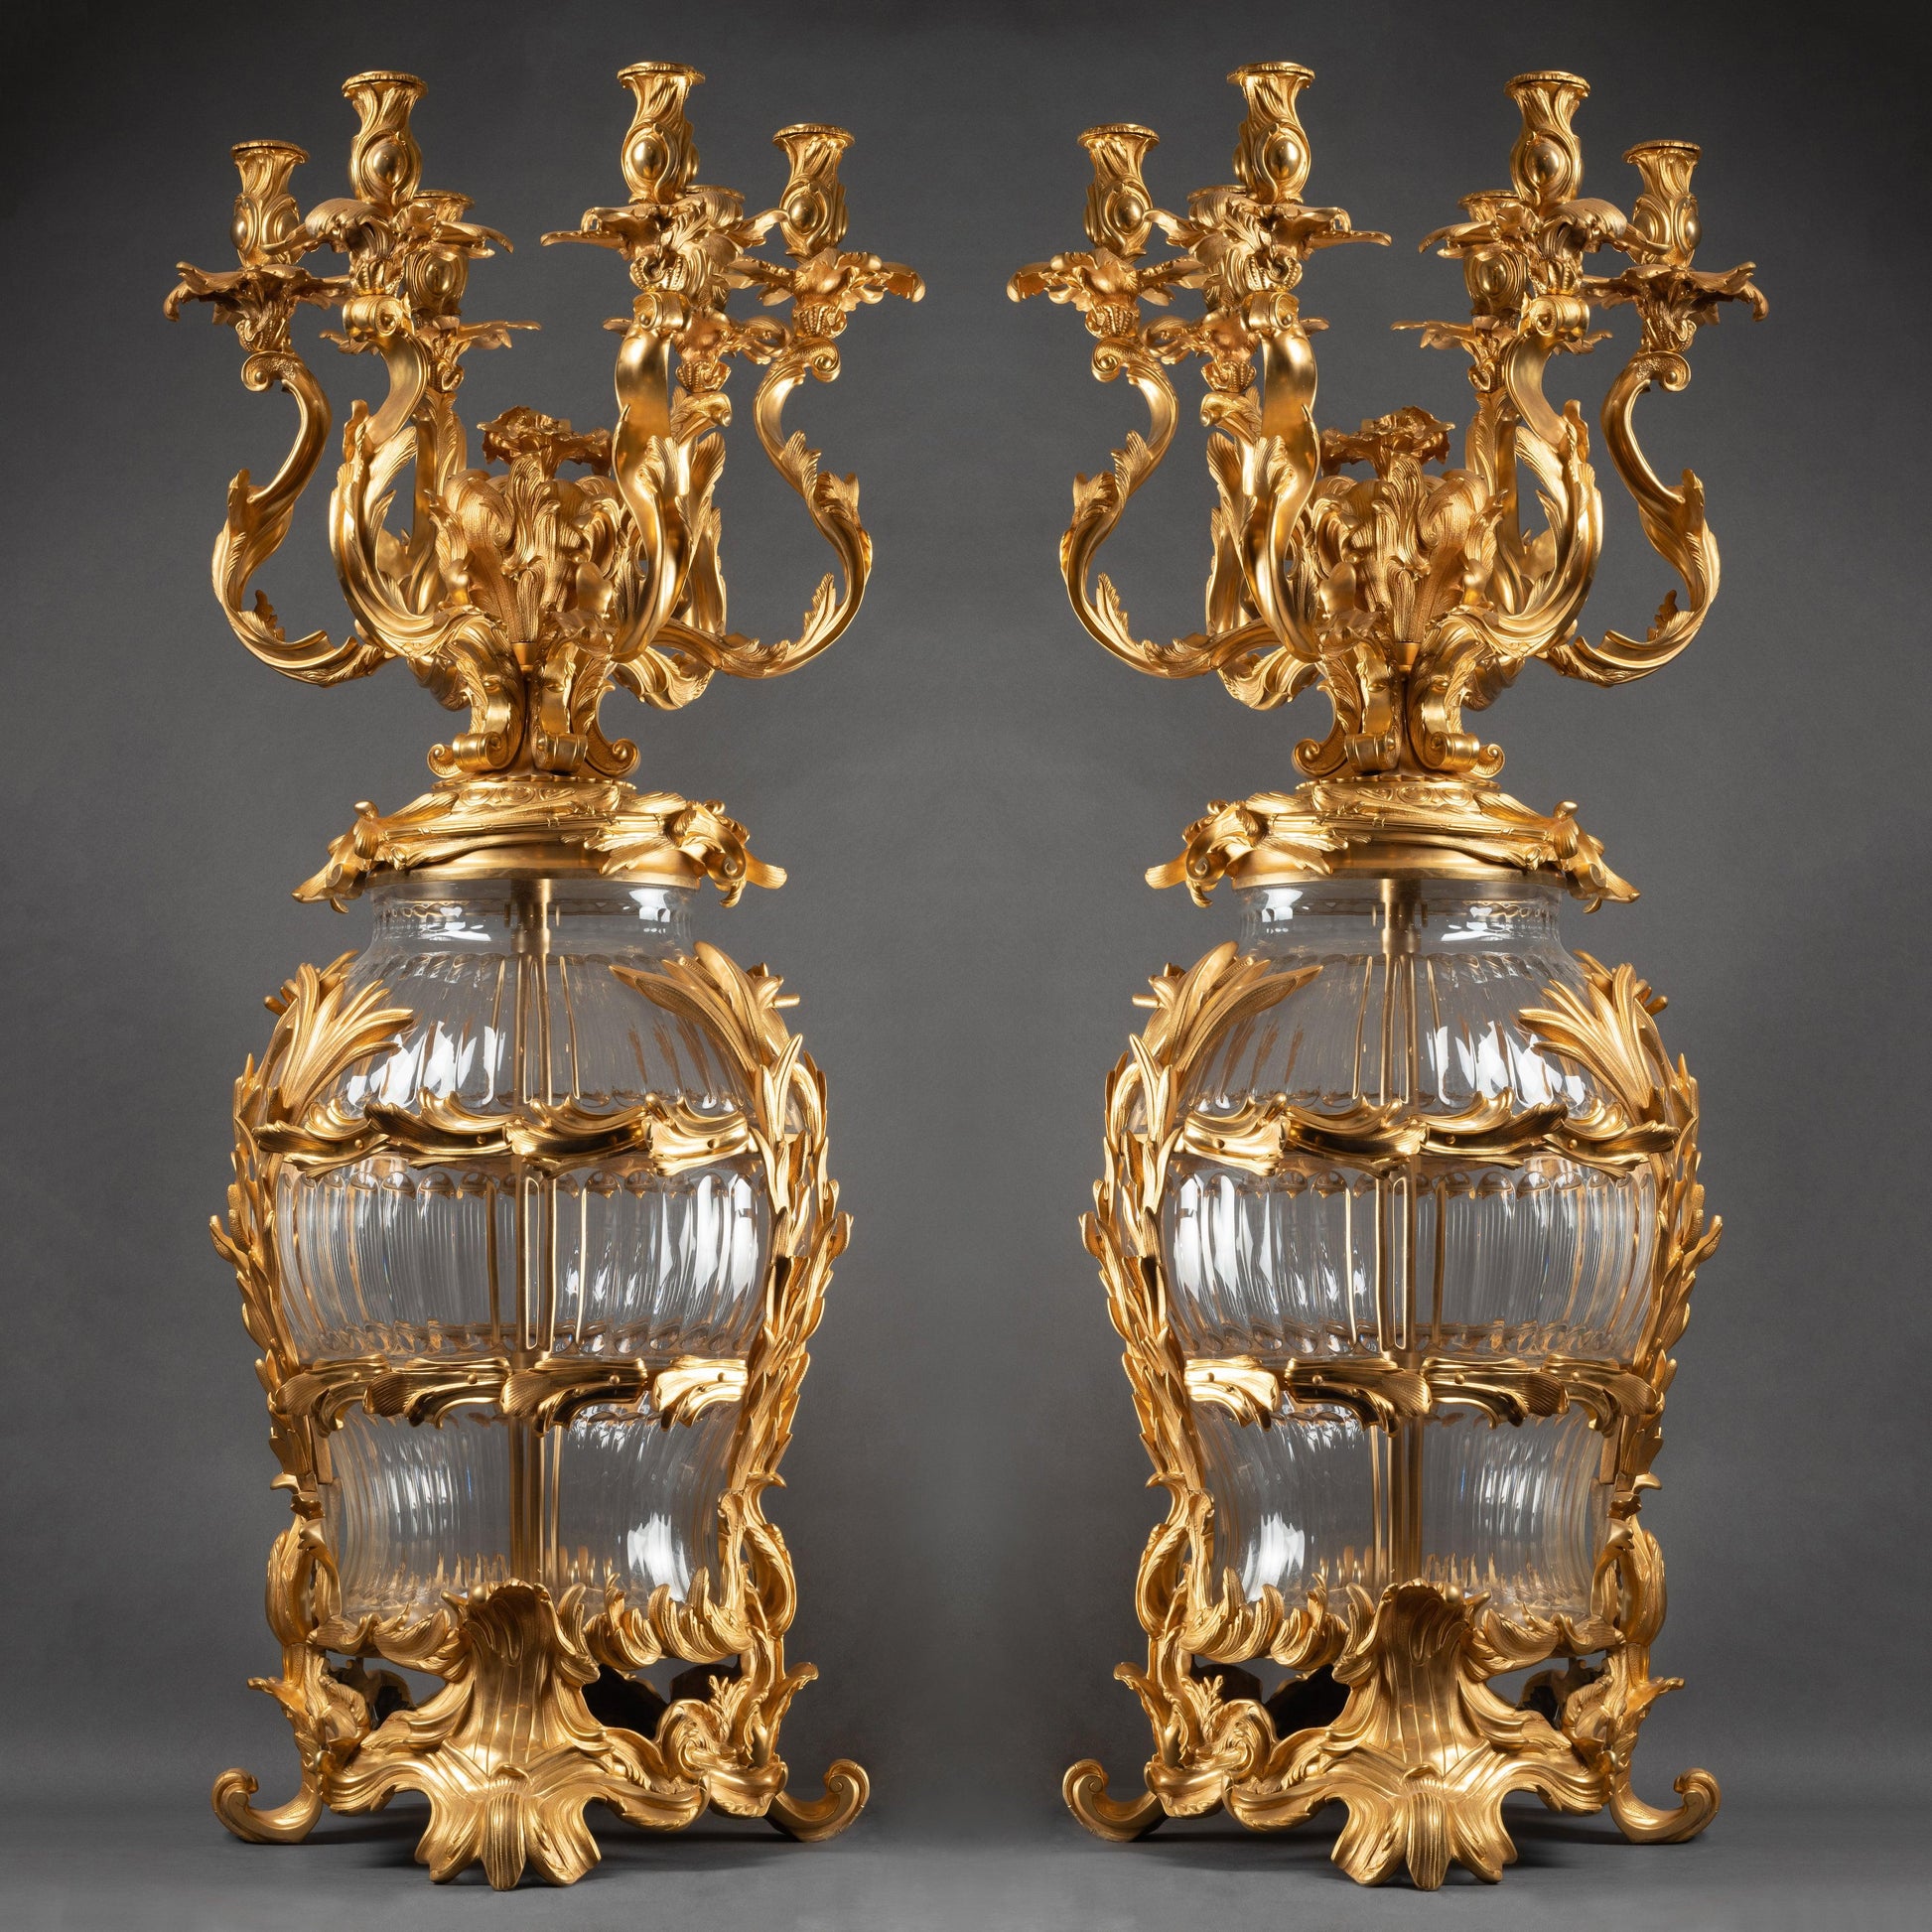 AN IMPOSING PAIR OF CONTINENTAL XXth CENTURY LOUIS XV St. CUT CRYSTAL AND GILT BRONZE CANDELABRAS. - Galerie Rosiers